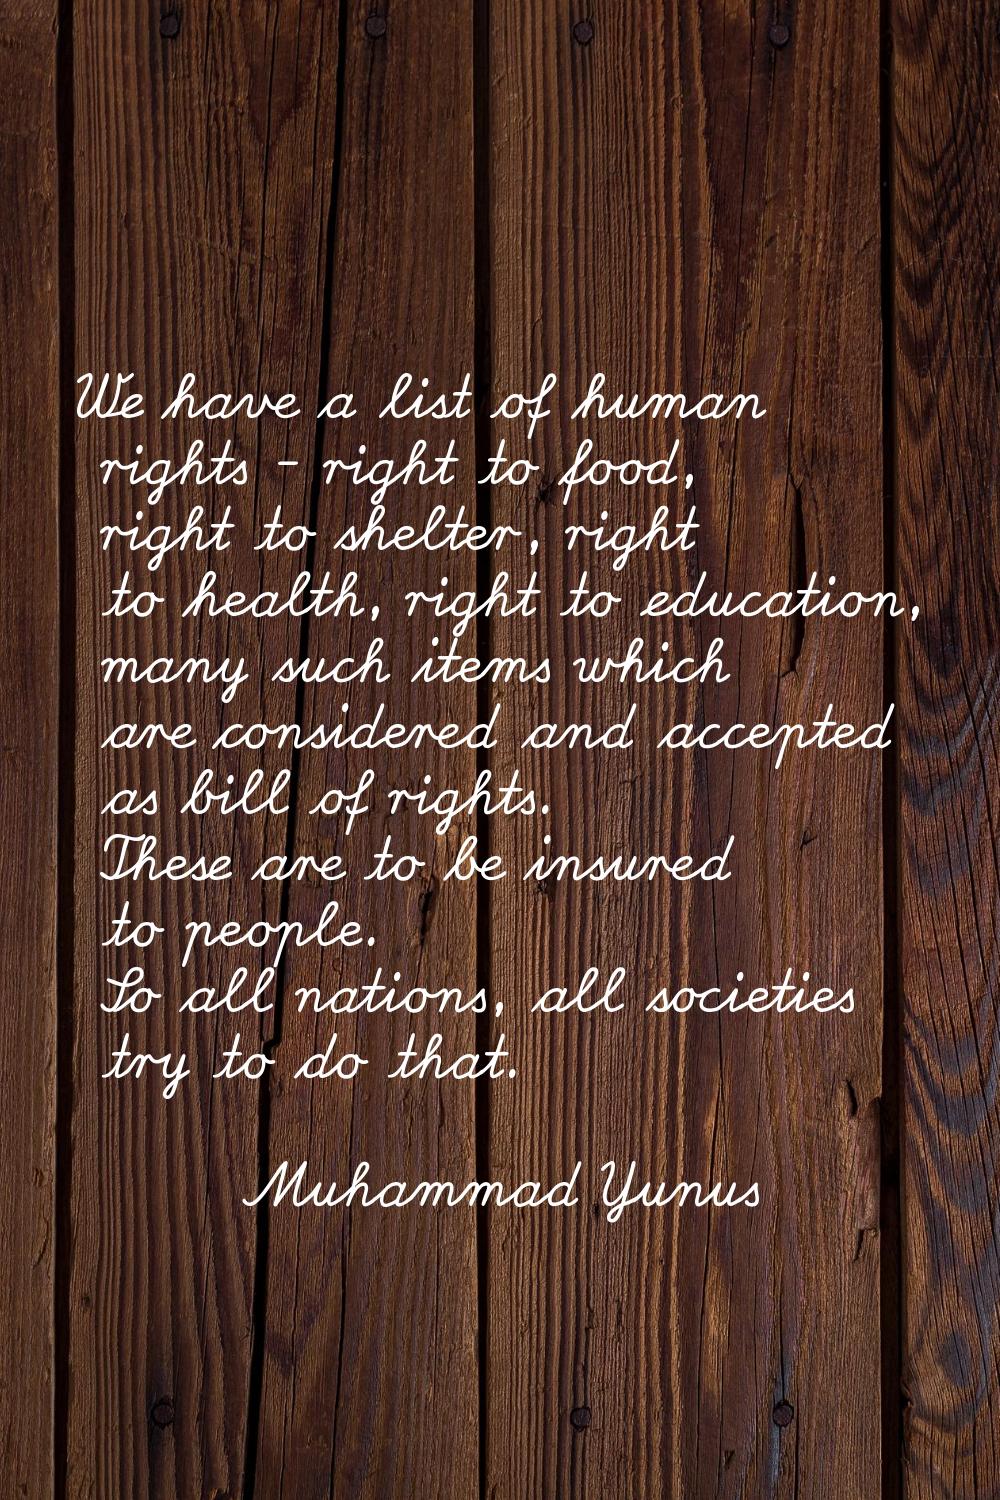 We have a list of human rights - right to food, right to shelter, right to health, right to educati